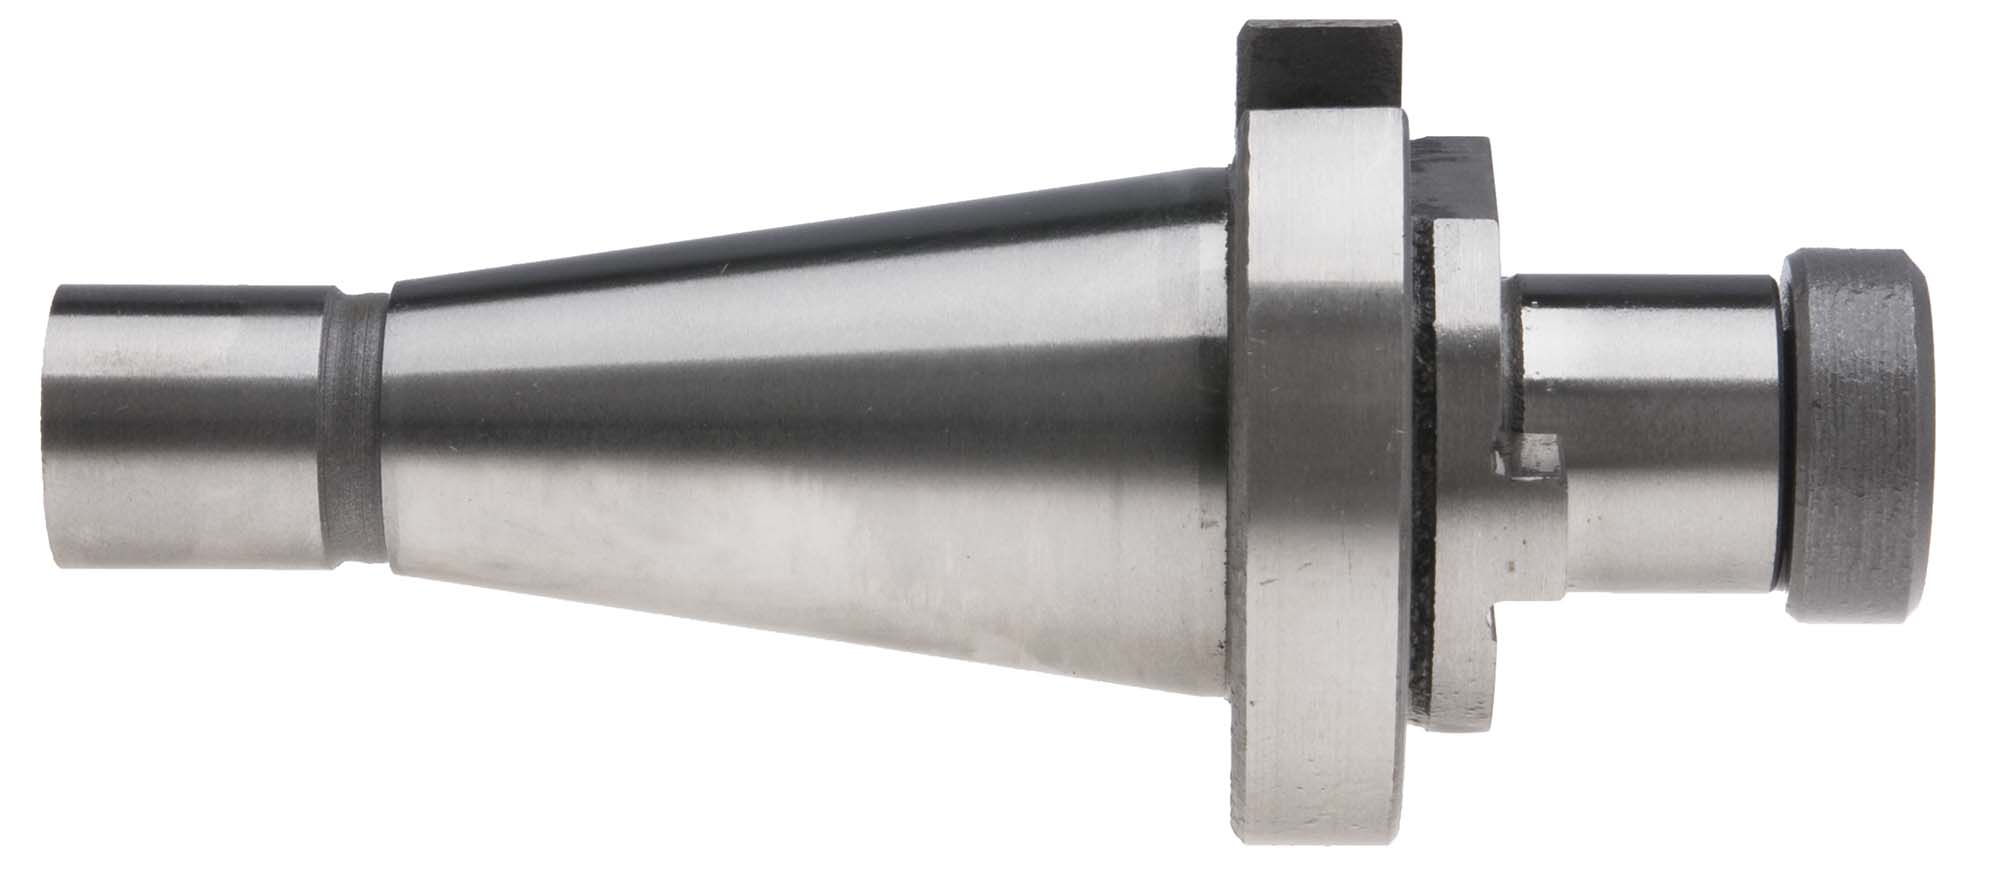 # 40 NST - 1-1/4 Shell End Mill Arbor